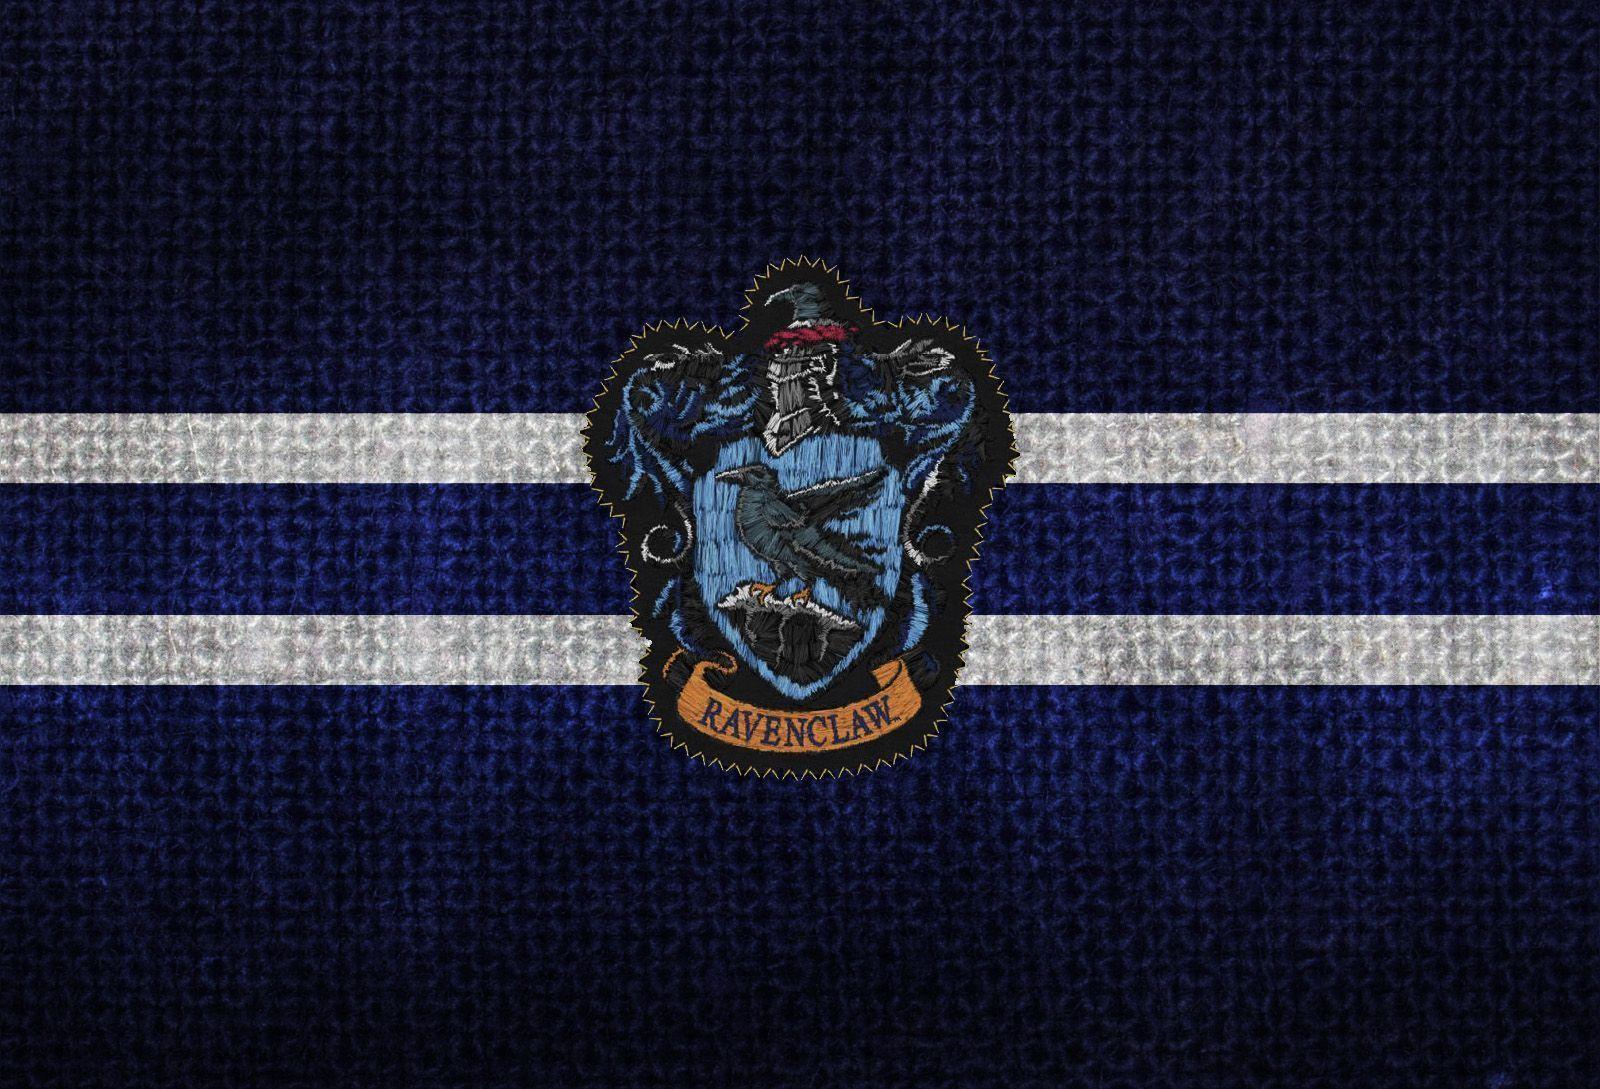 Download Ravenclaw Wallpaper Gallery